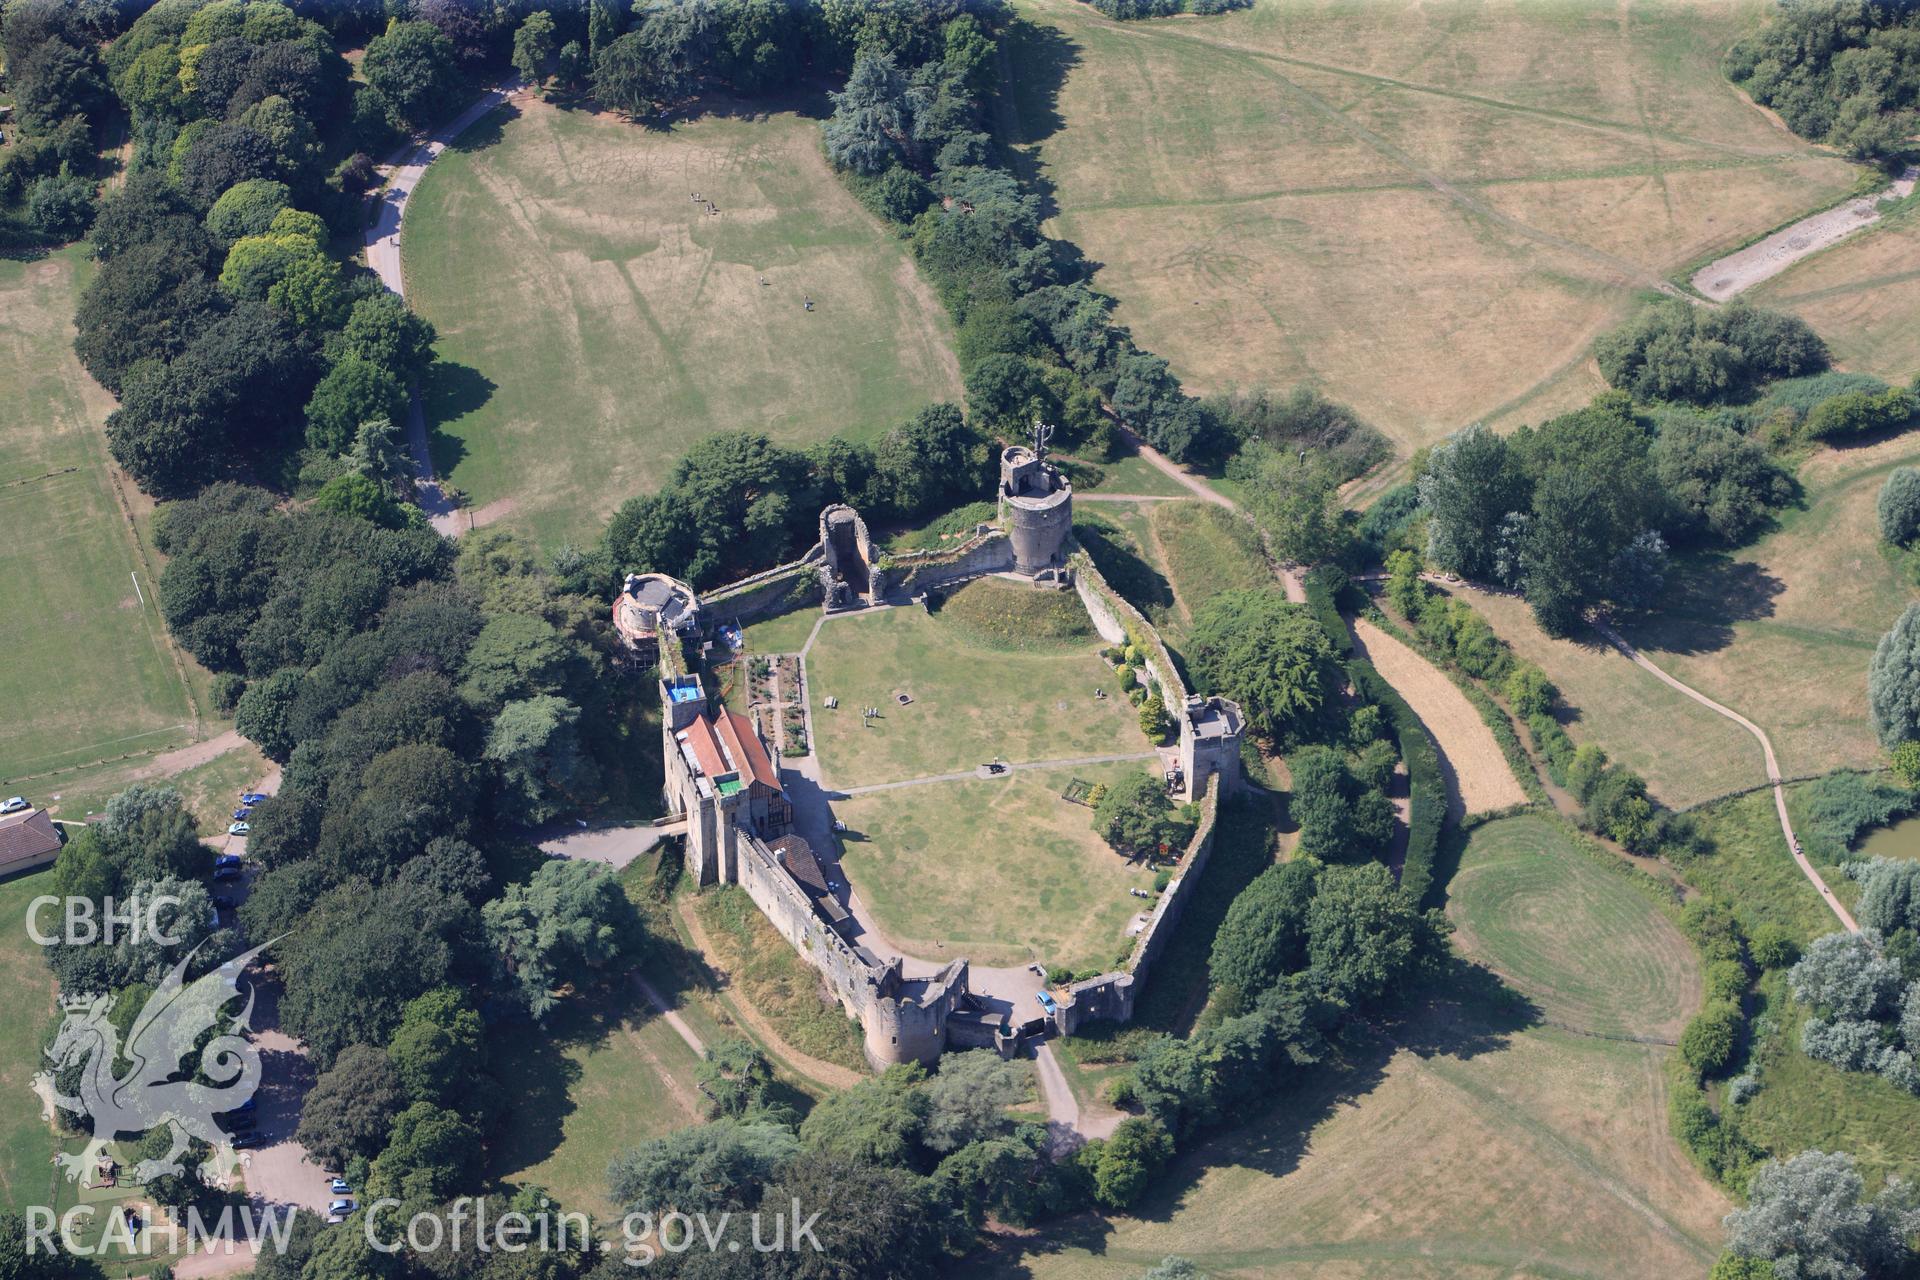 Caldicot Castle, in the town of Caldicot, east of Newport. Oblique aerial photograph taken during the Royal Commission?s programme of archaeological aerial reconnaissance by Toby Driver on 1st August 2013.